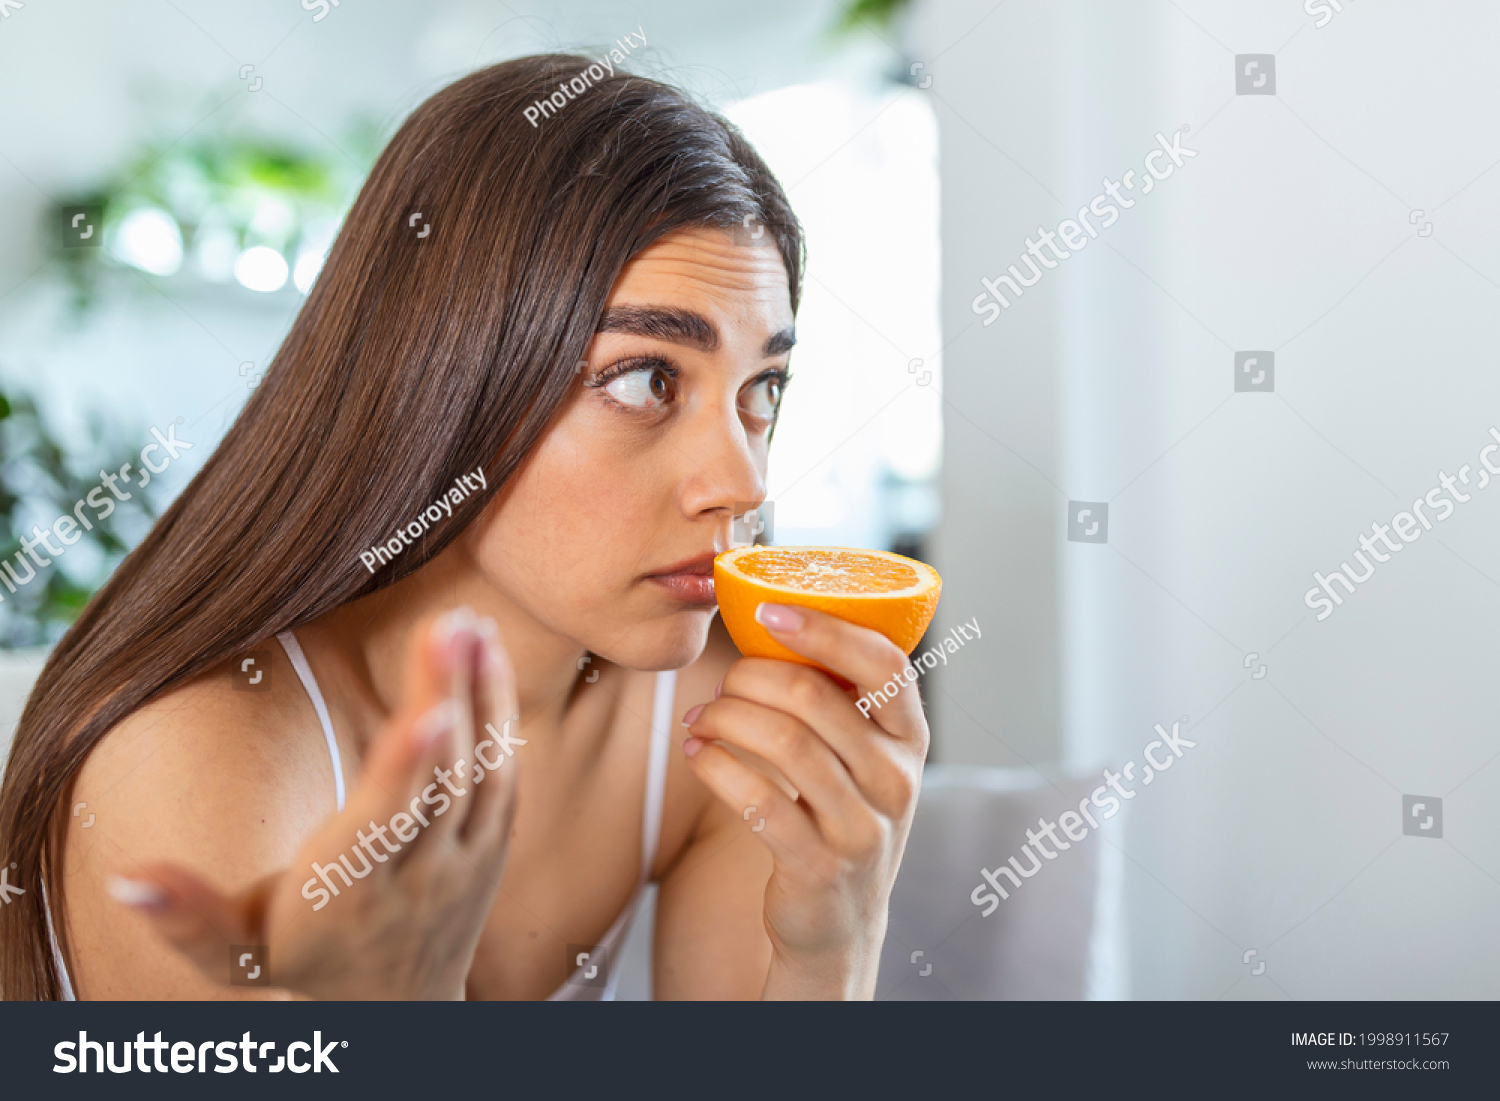 Sick woman trying to sense smell of half fresh orange, has symptoms of Covid-19, corona virus infection - loss of smell and taste. One of the main signs of the disease. #1998911567